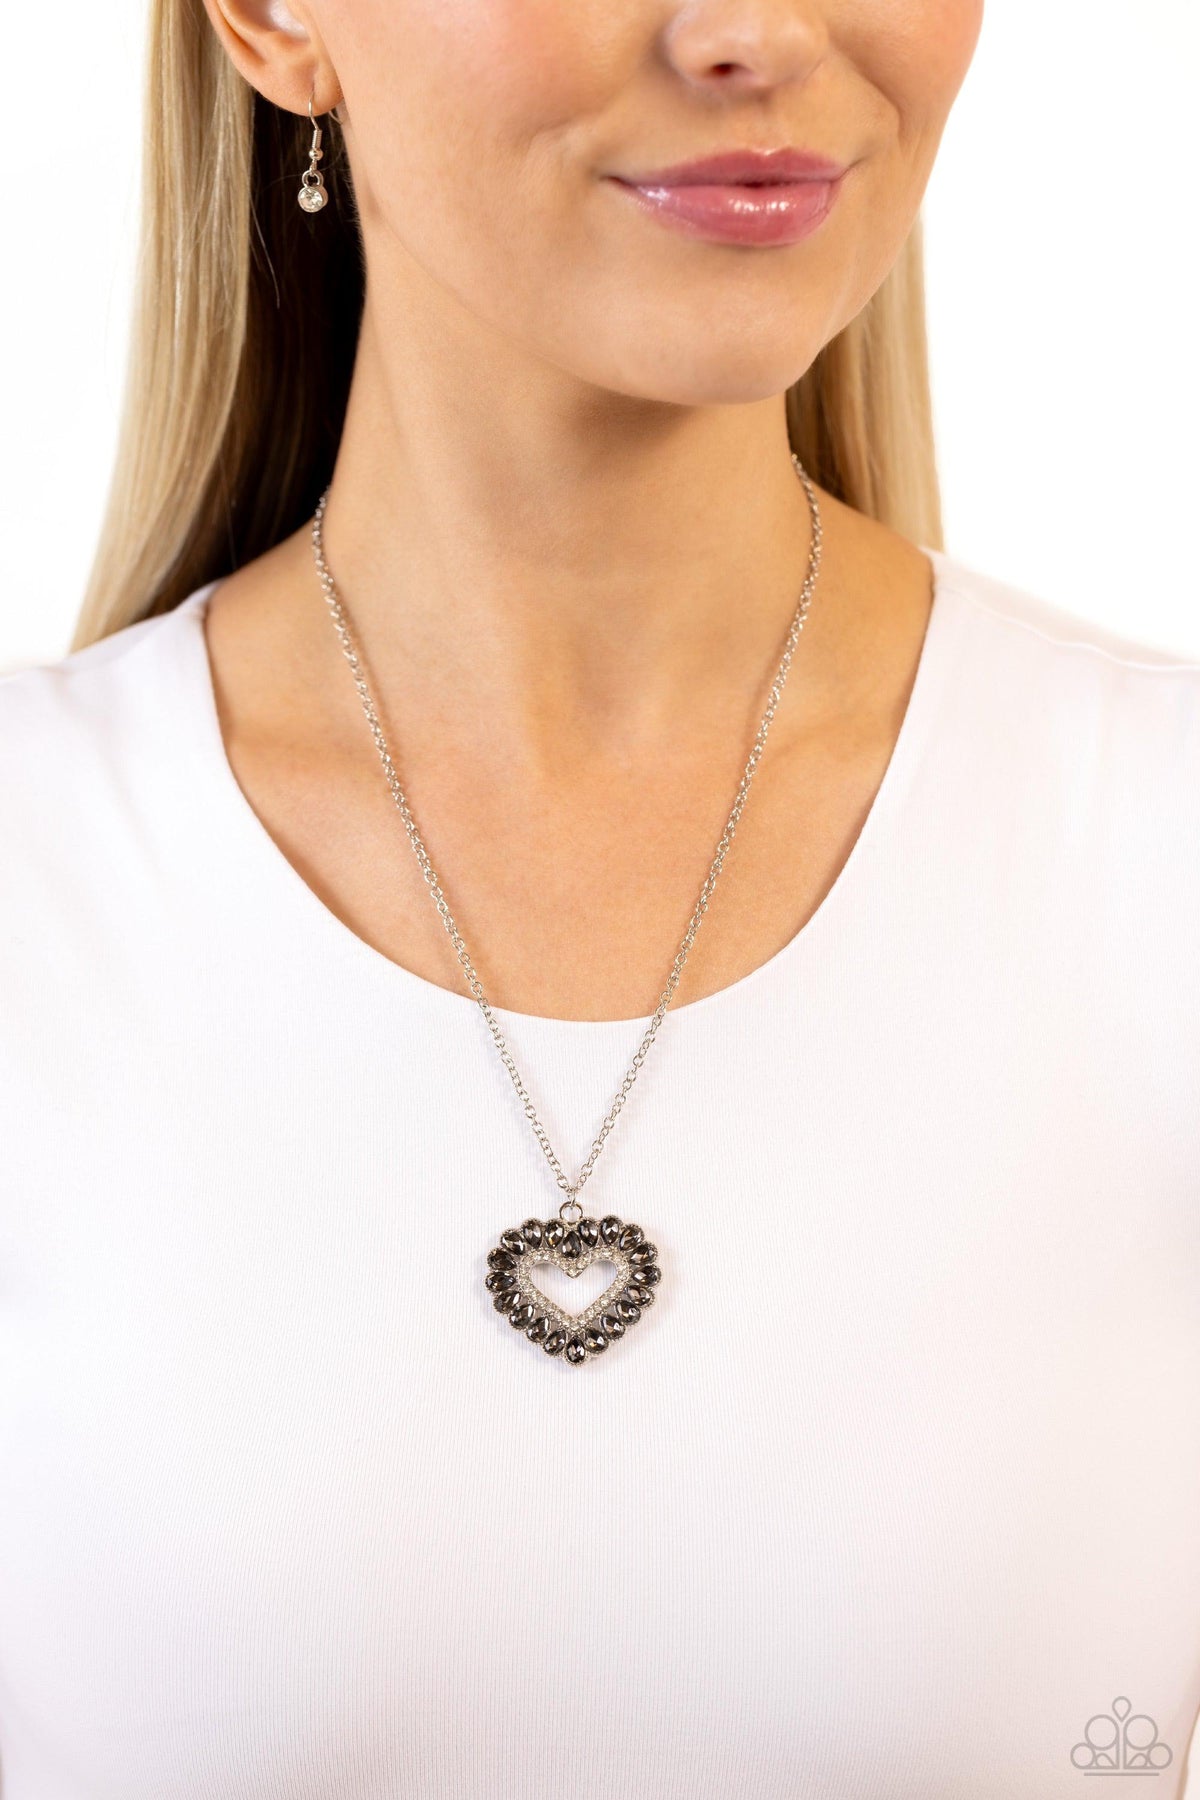 FLIRT No More Silver &amp; White Rhinestone Heart Necklace - Paparazzi Accessories-on model - CarasShop.com - $5 Jewelry by Cara Jewels